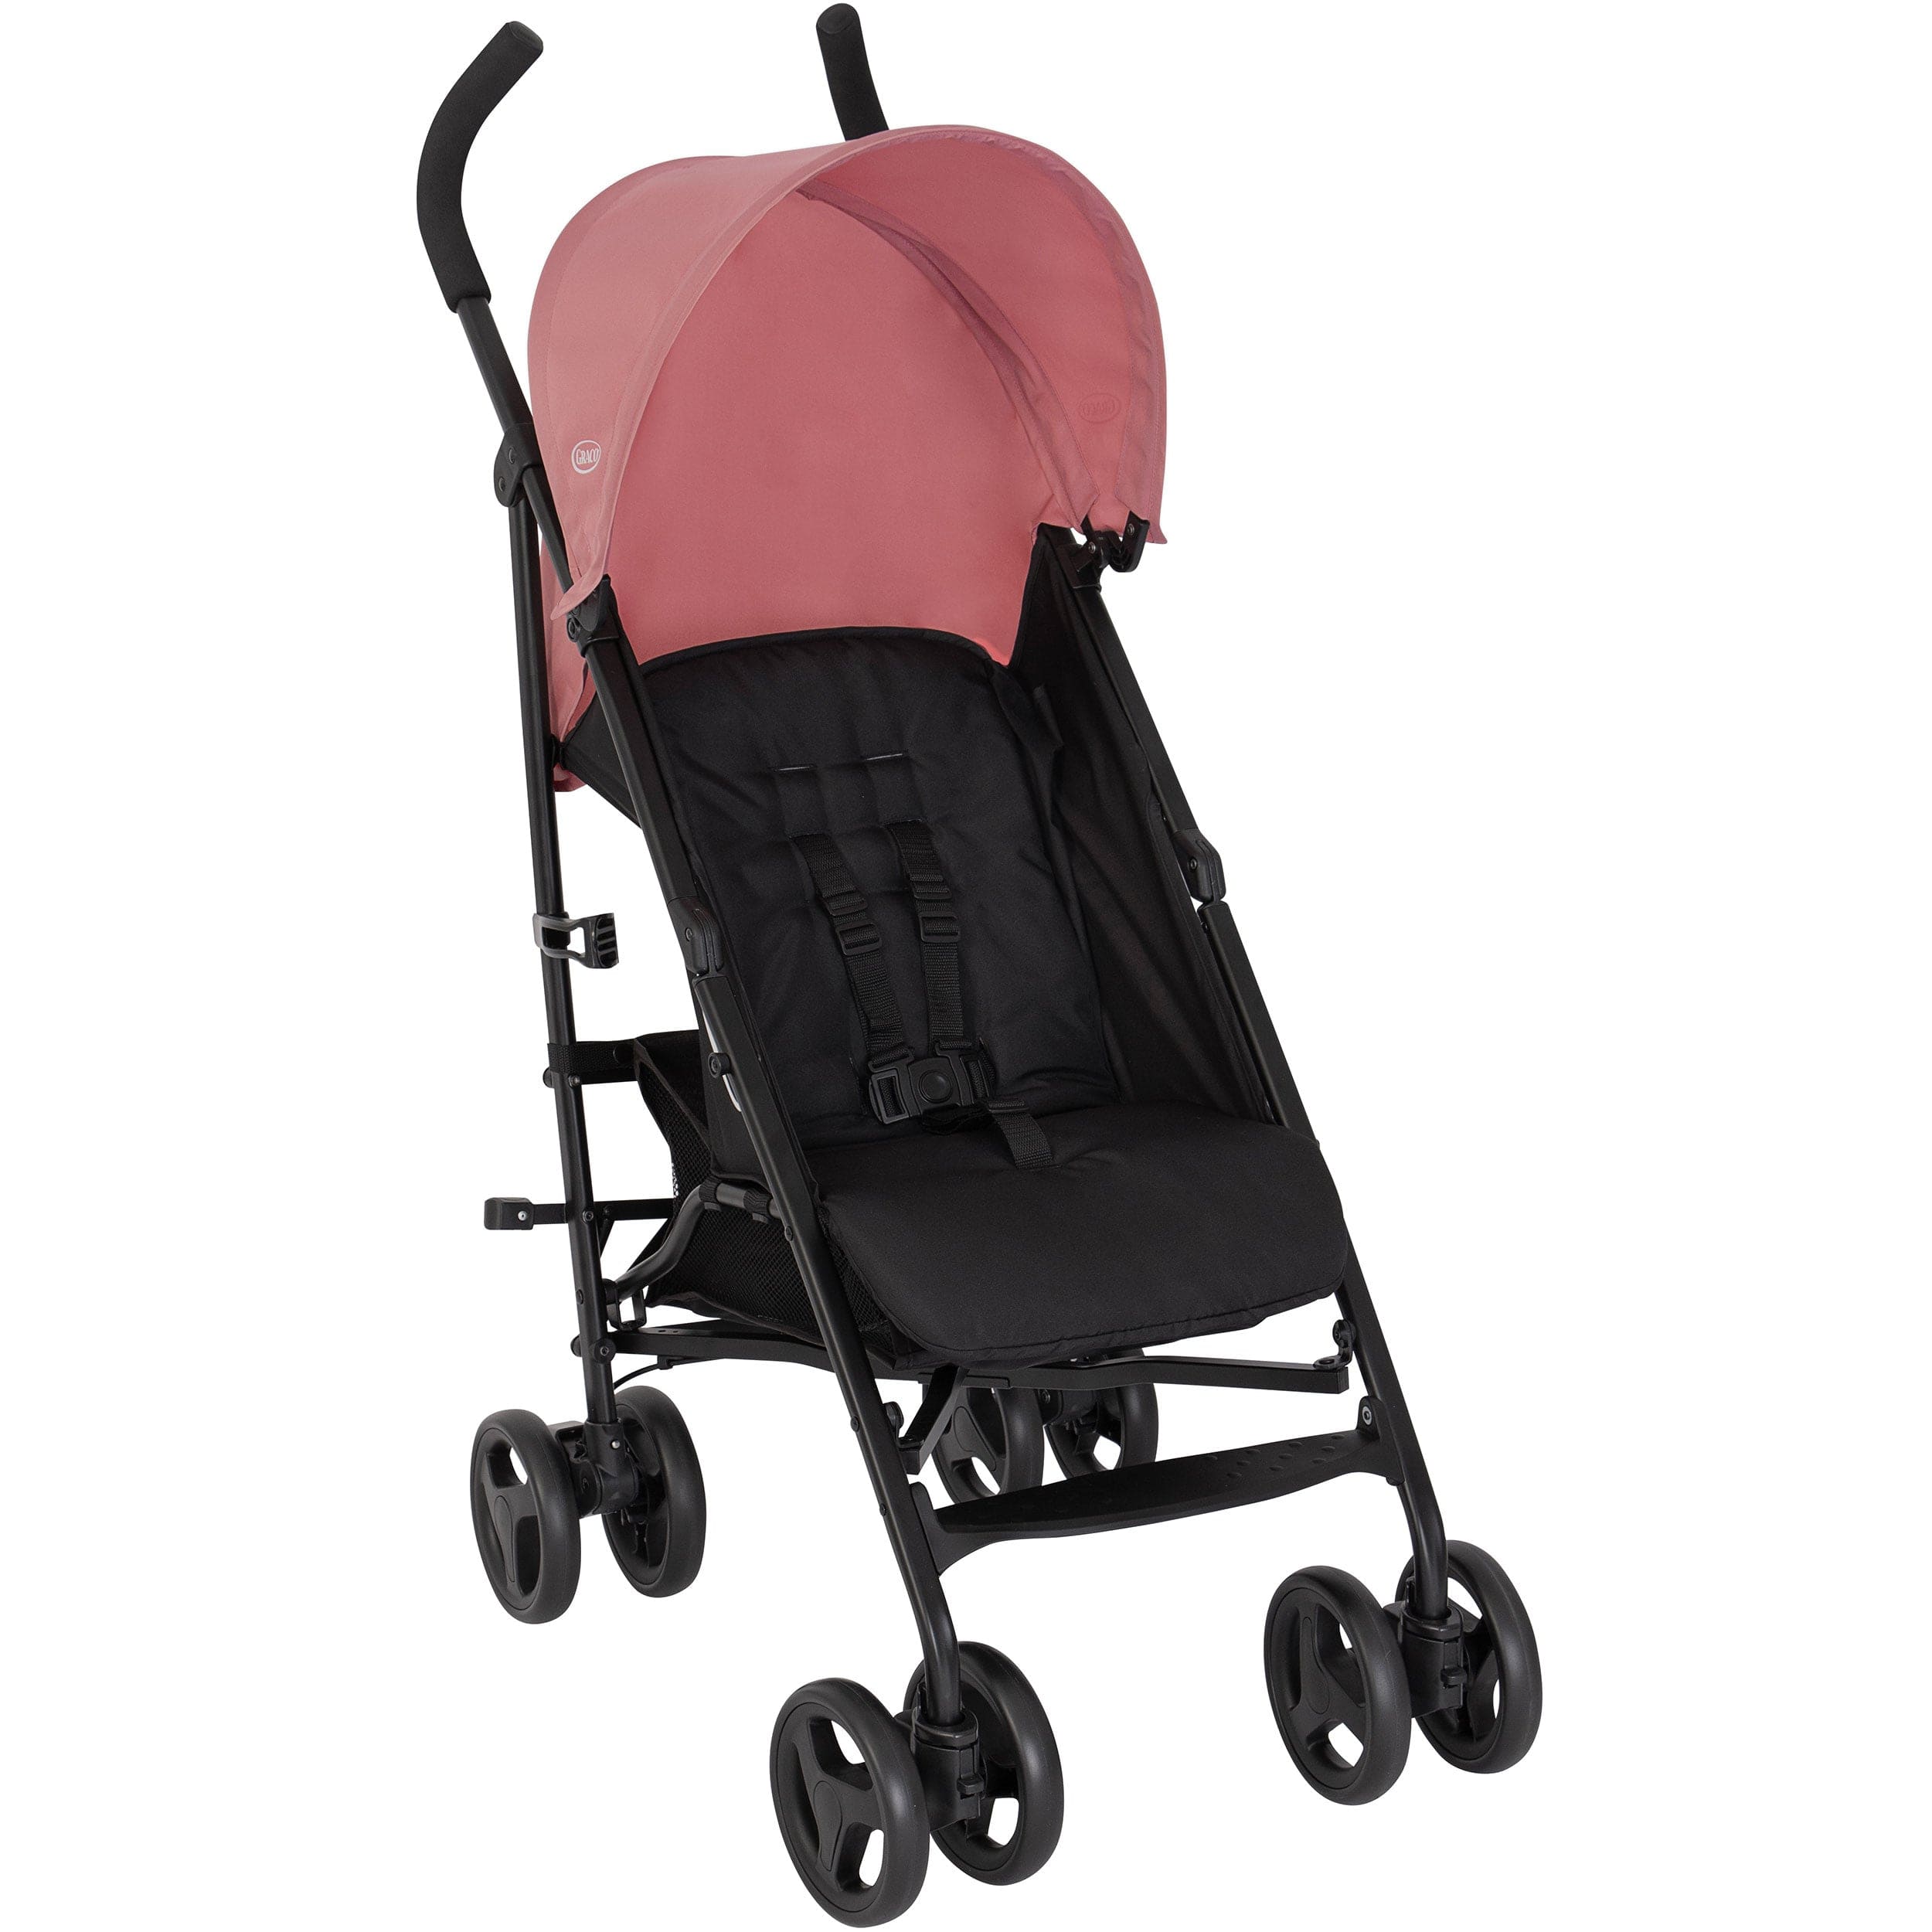 Graco baby pushchairs Graco Ezlite Pushchair in Dusty Rose 6BF899DSTEU